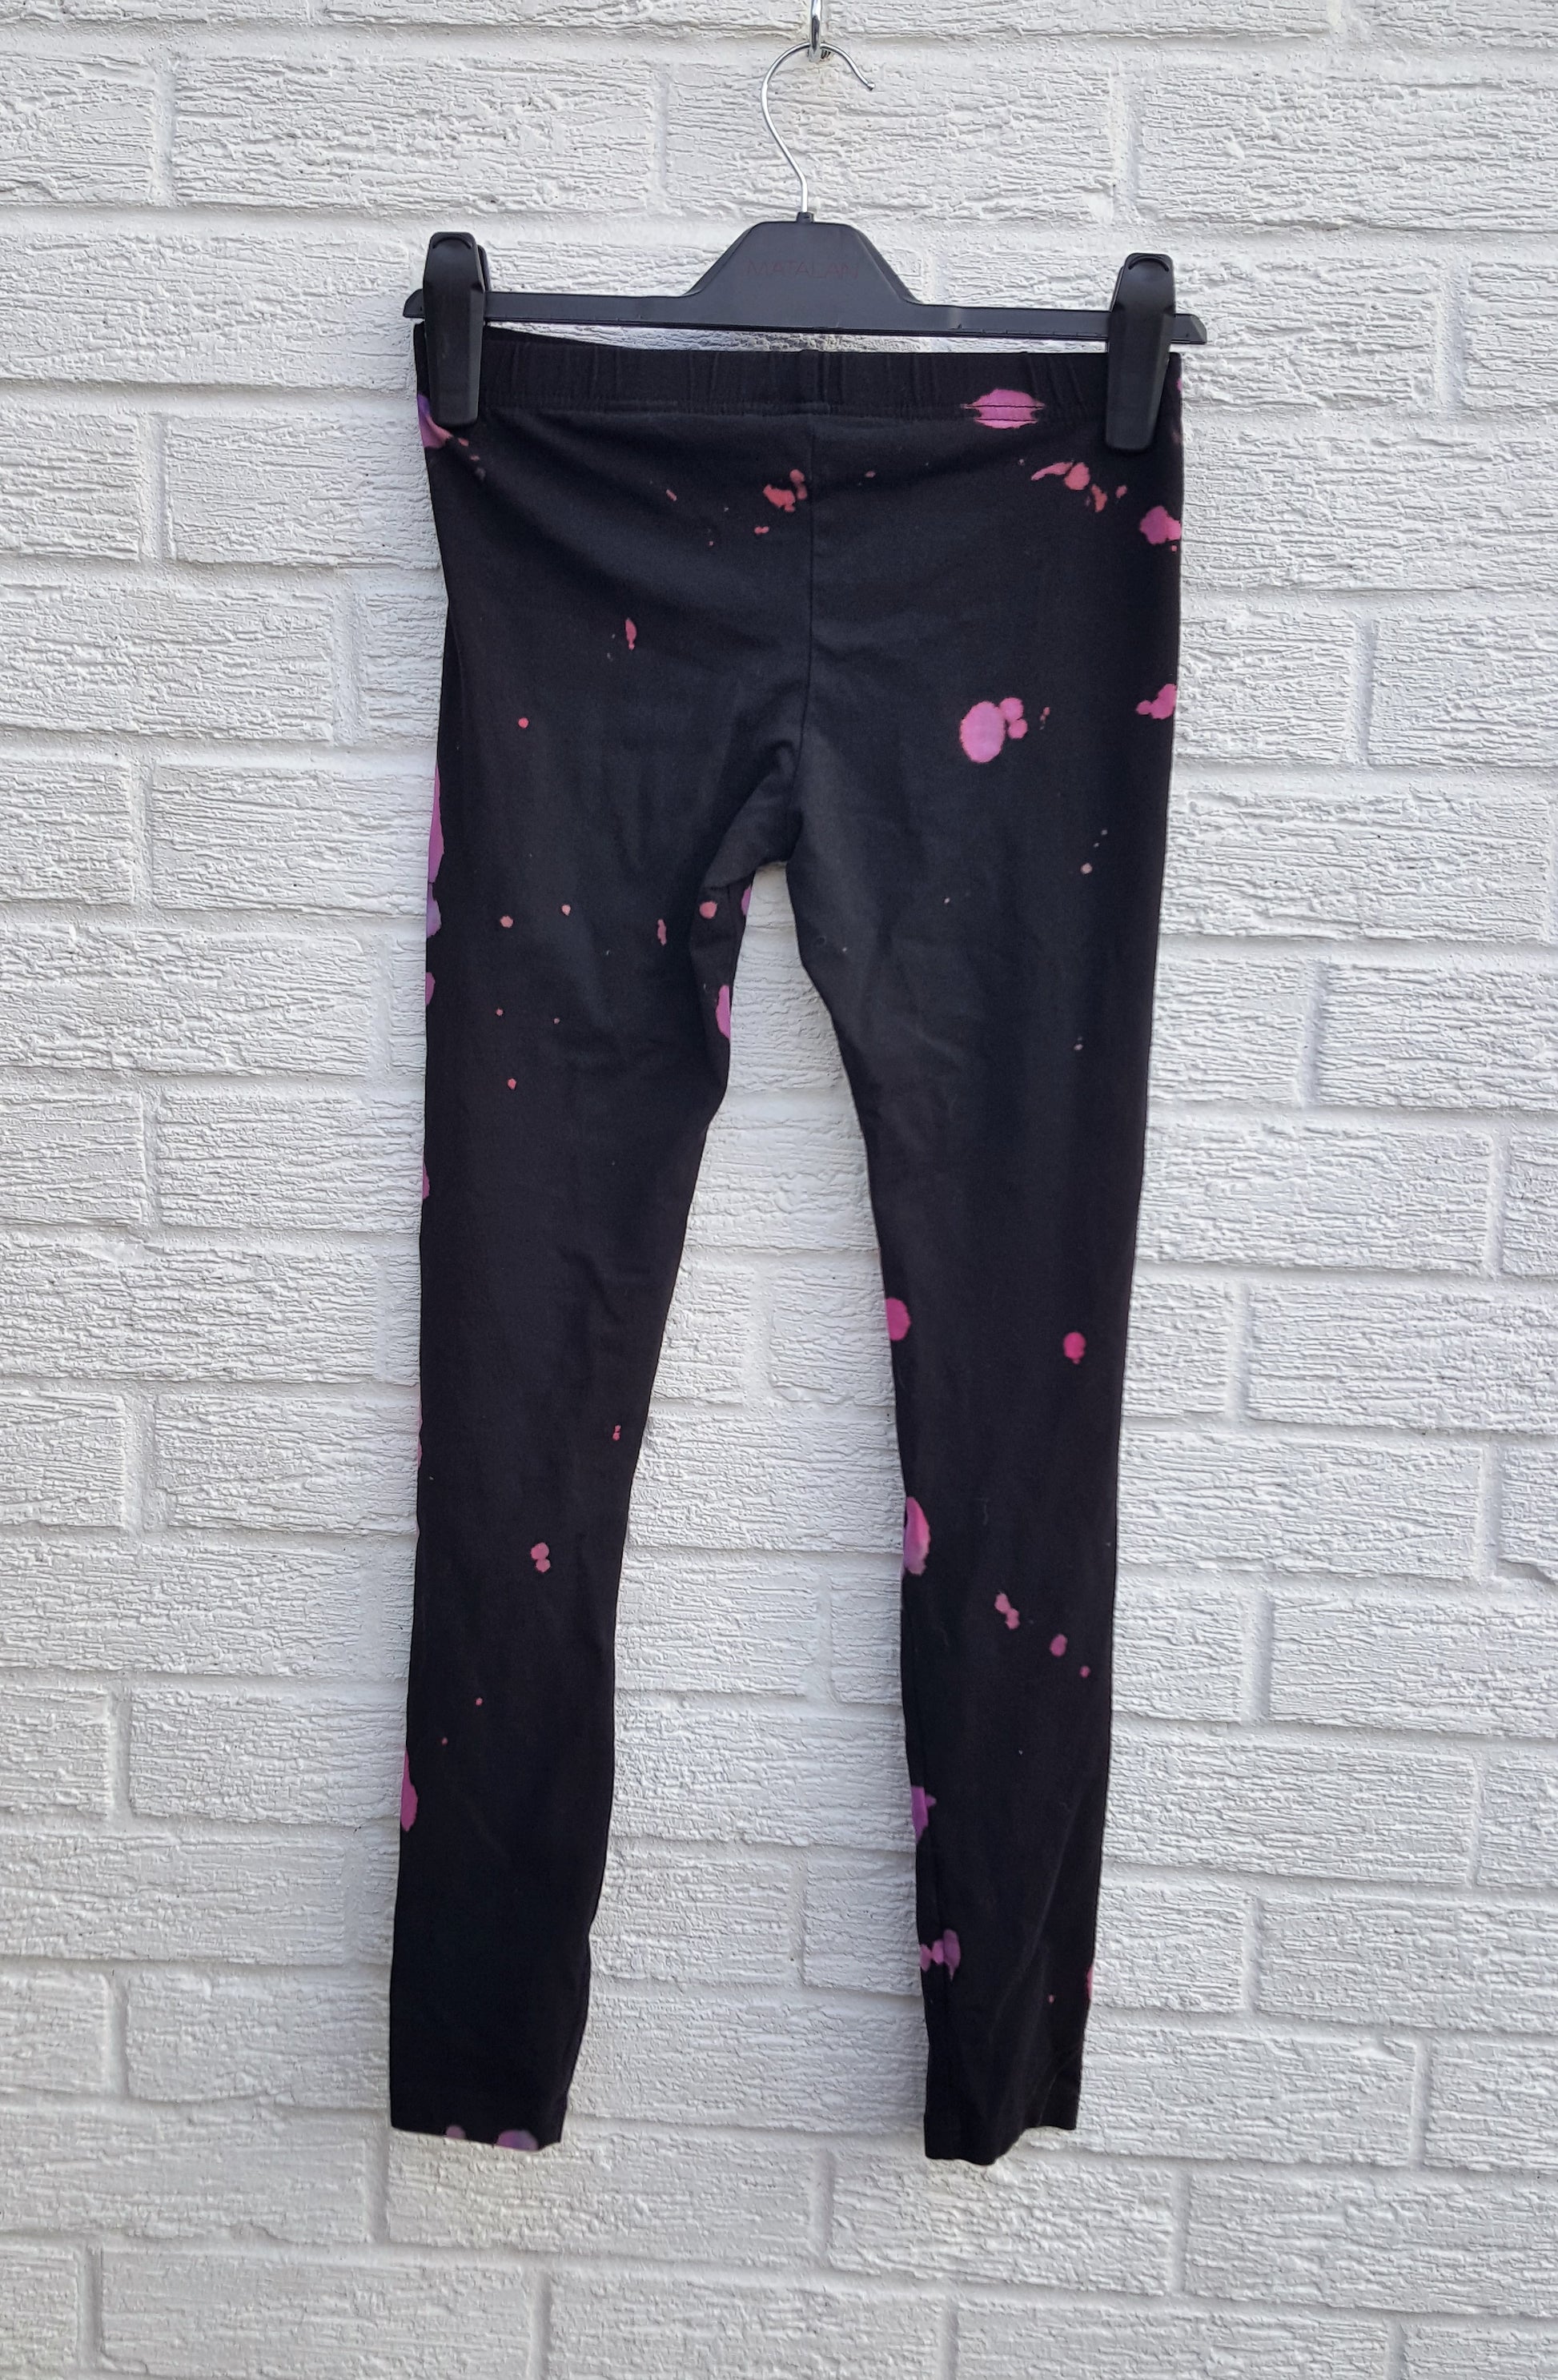 Bleach dyed and hand dyed women's leggings, perfect for yoga class! In beautiful aqua & pink bleach dye shades in 100% Cotton Size S.  Hand dyed with love by AbiDashery.  Only one pair available.   We only use recycled and compostable packaging!